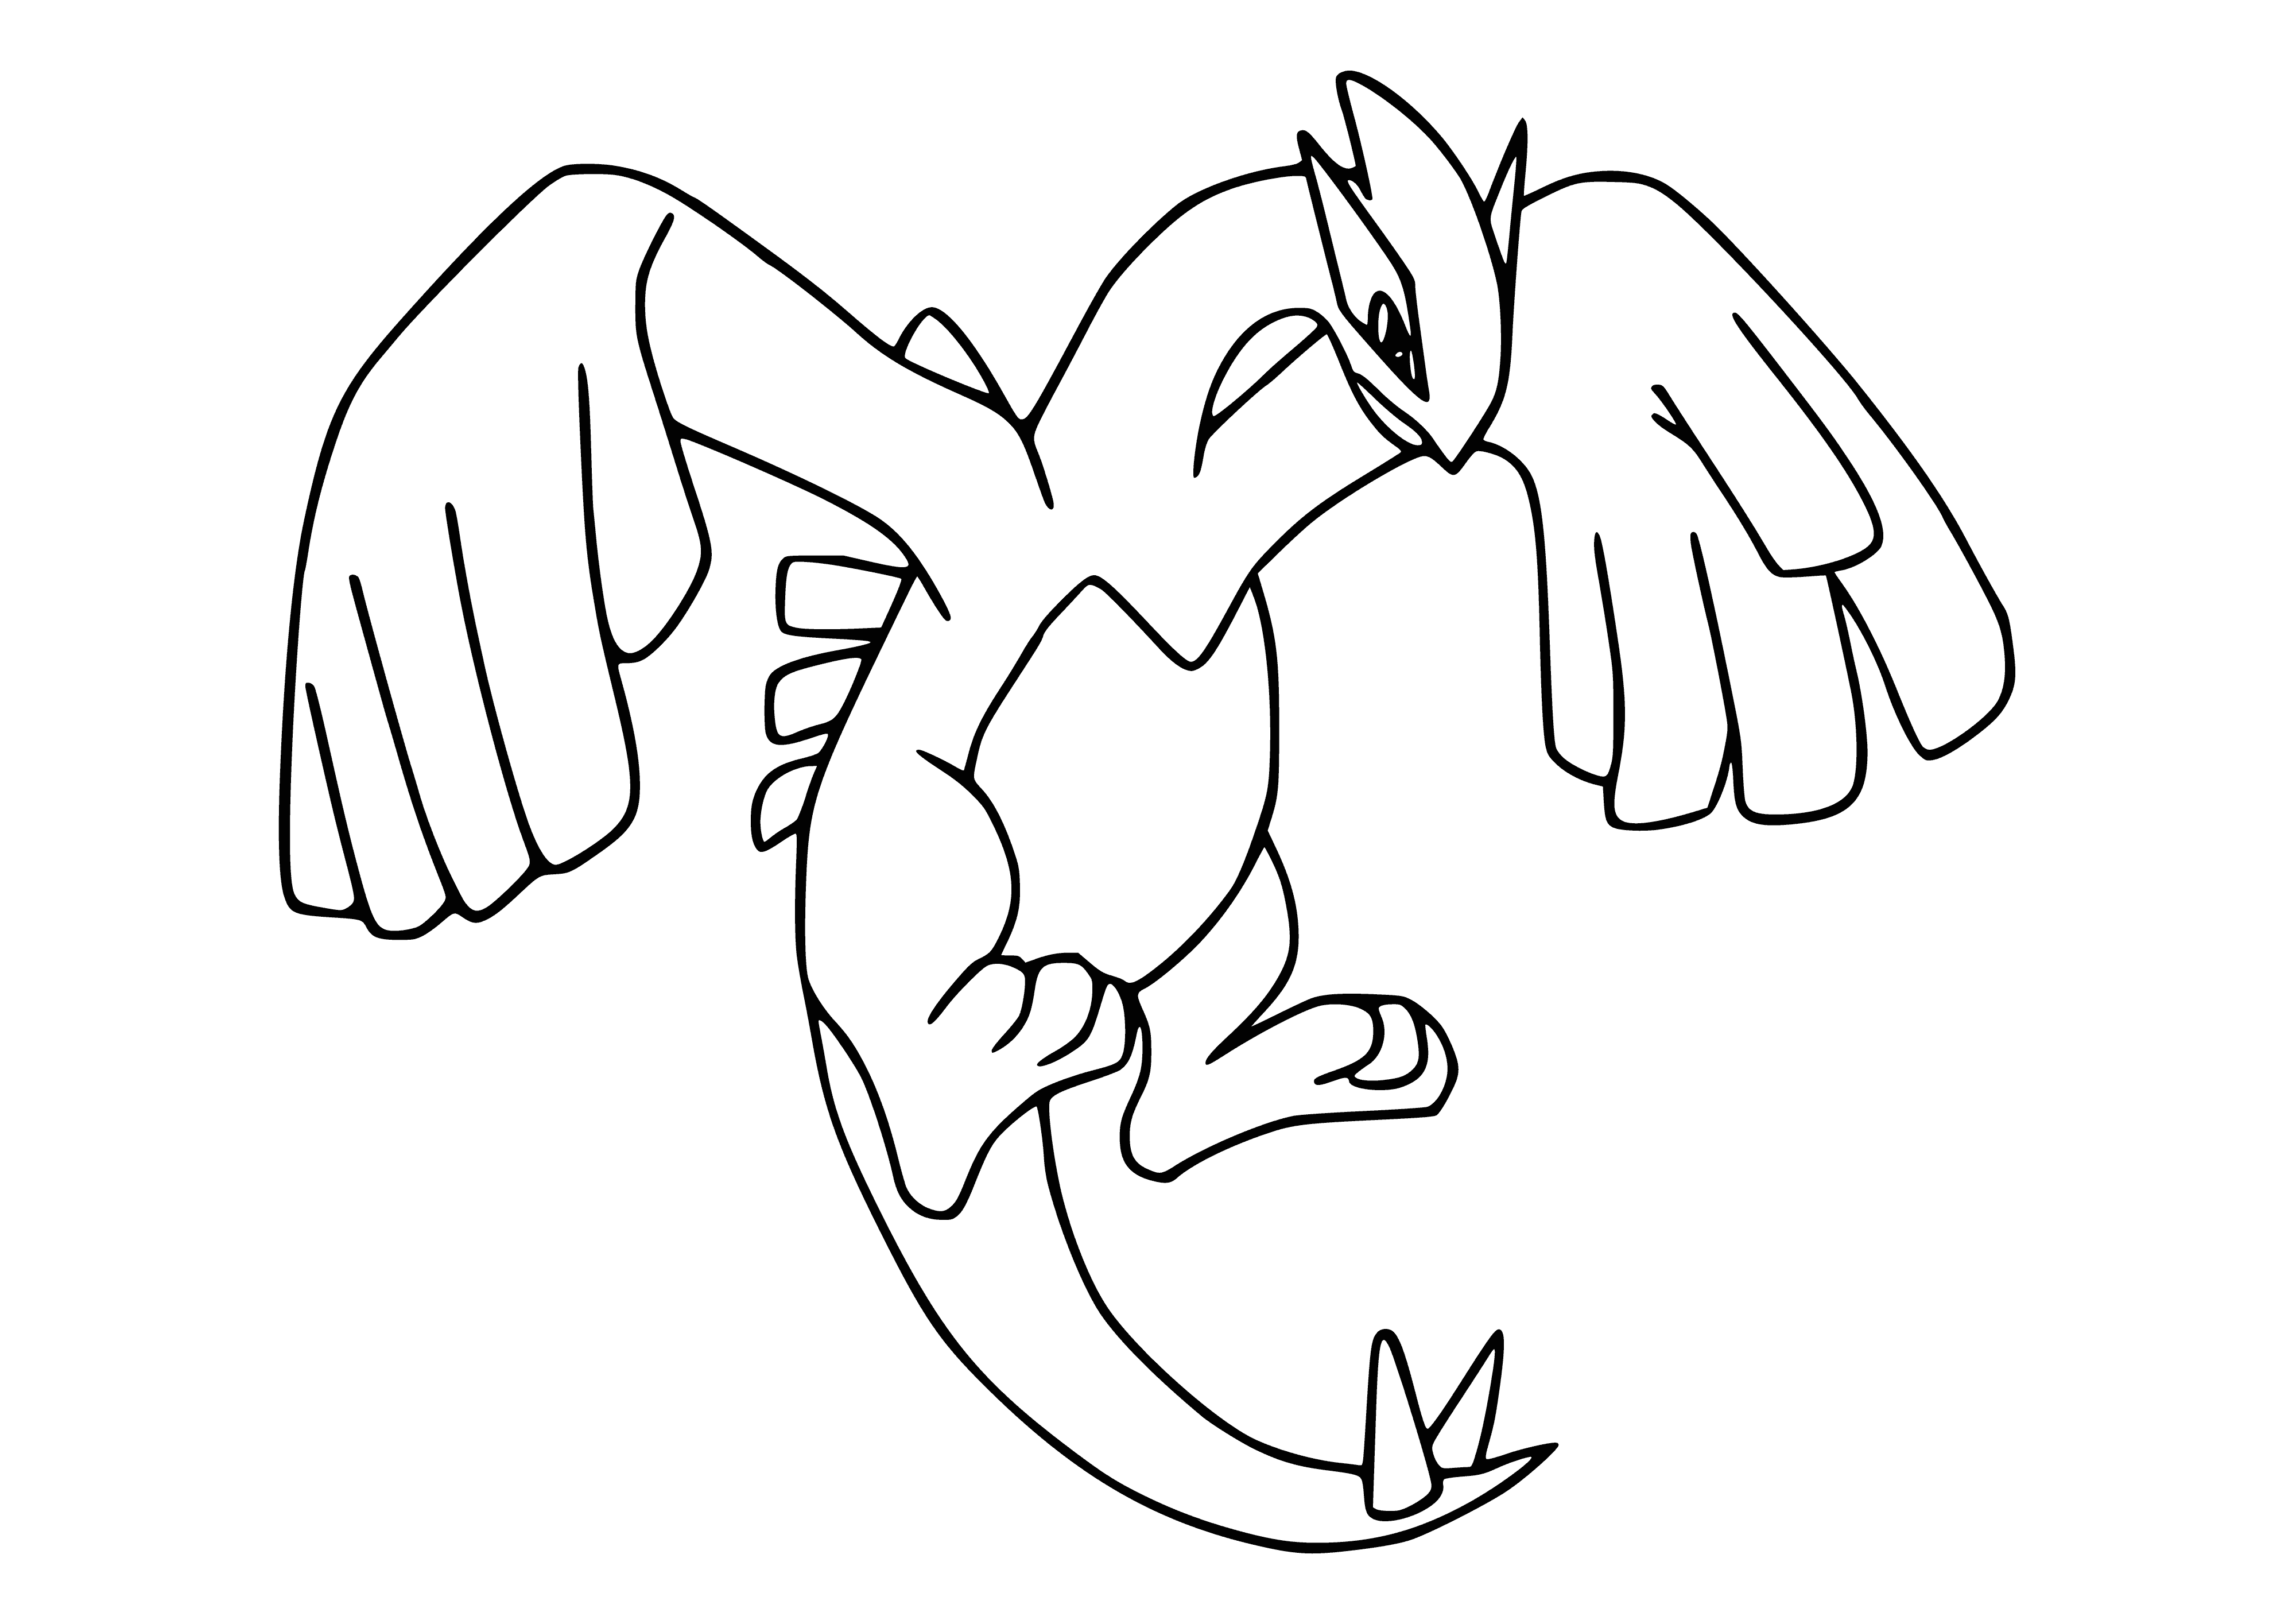 coloring page: Legendary Pokemon with blue body, white belly & crown-like crest. Huge, sweeping wings & a calm, regal presence.